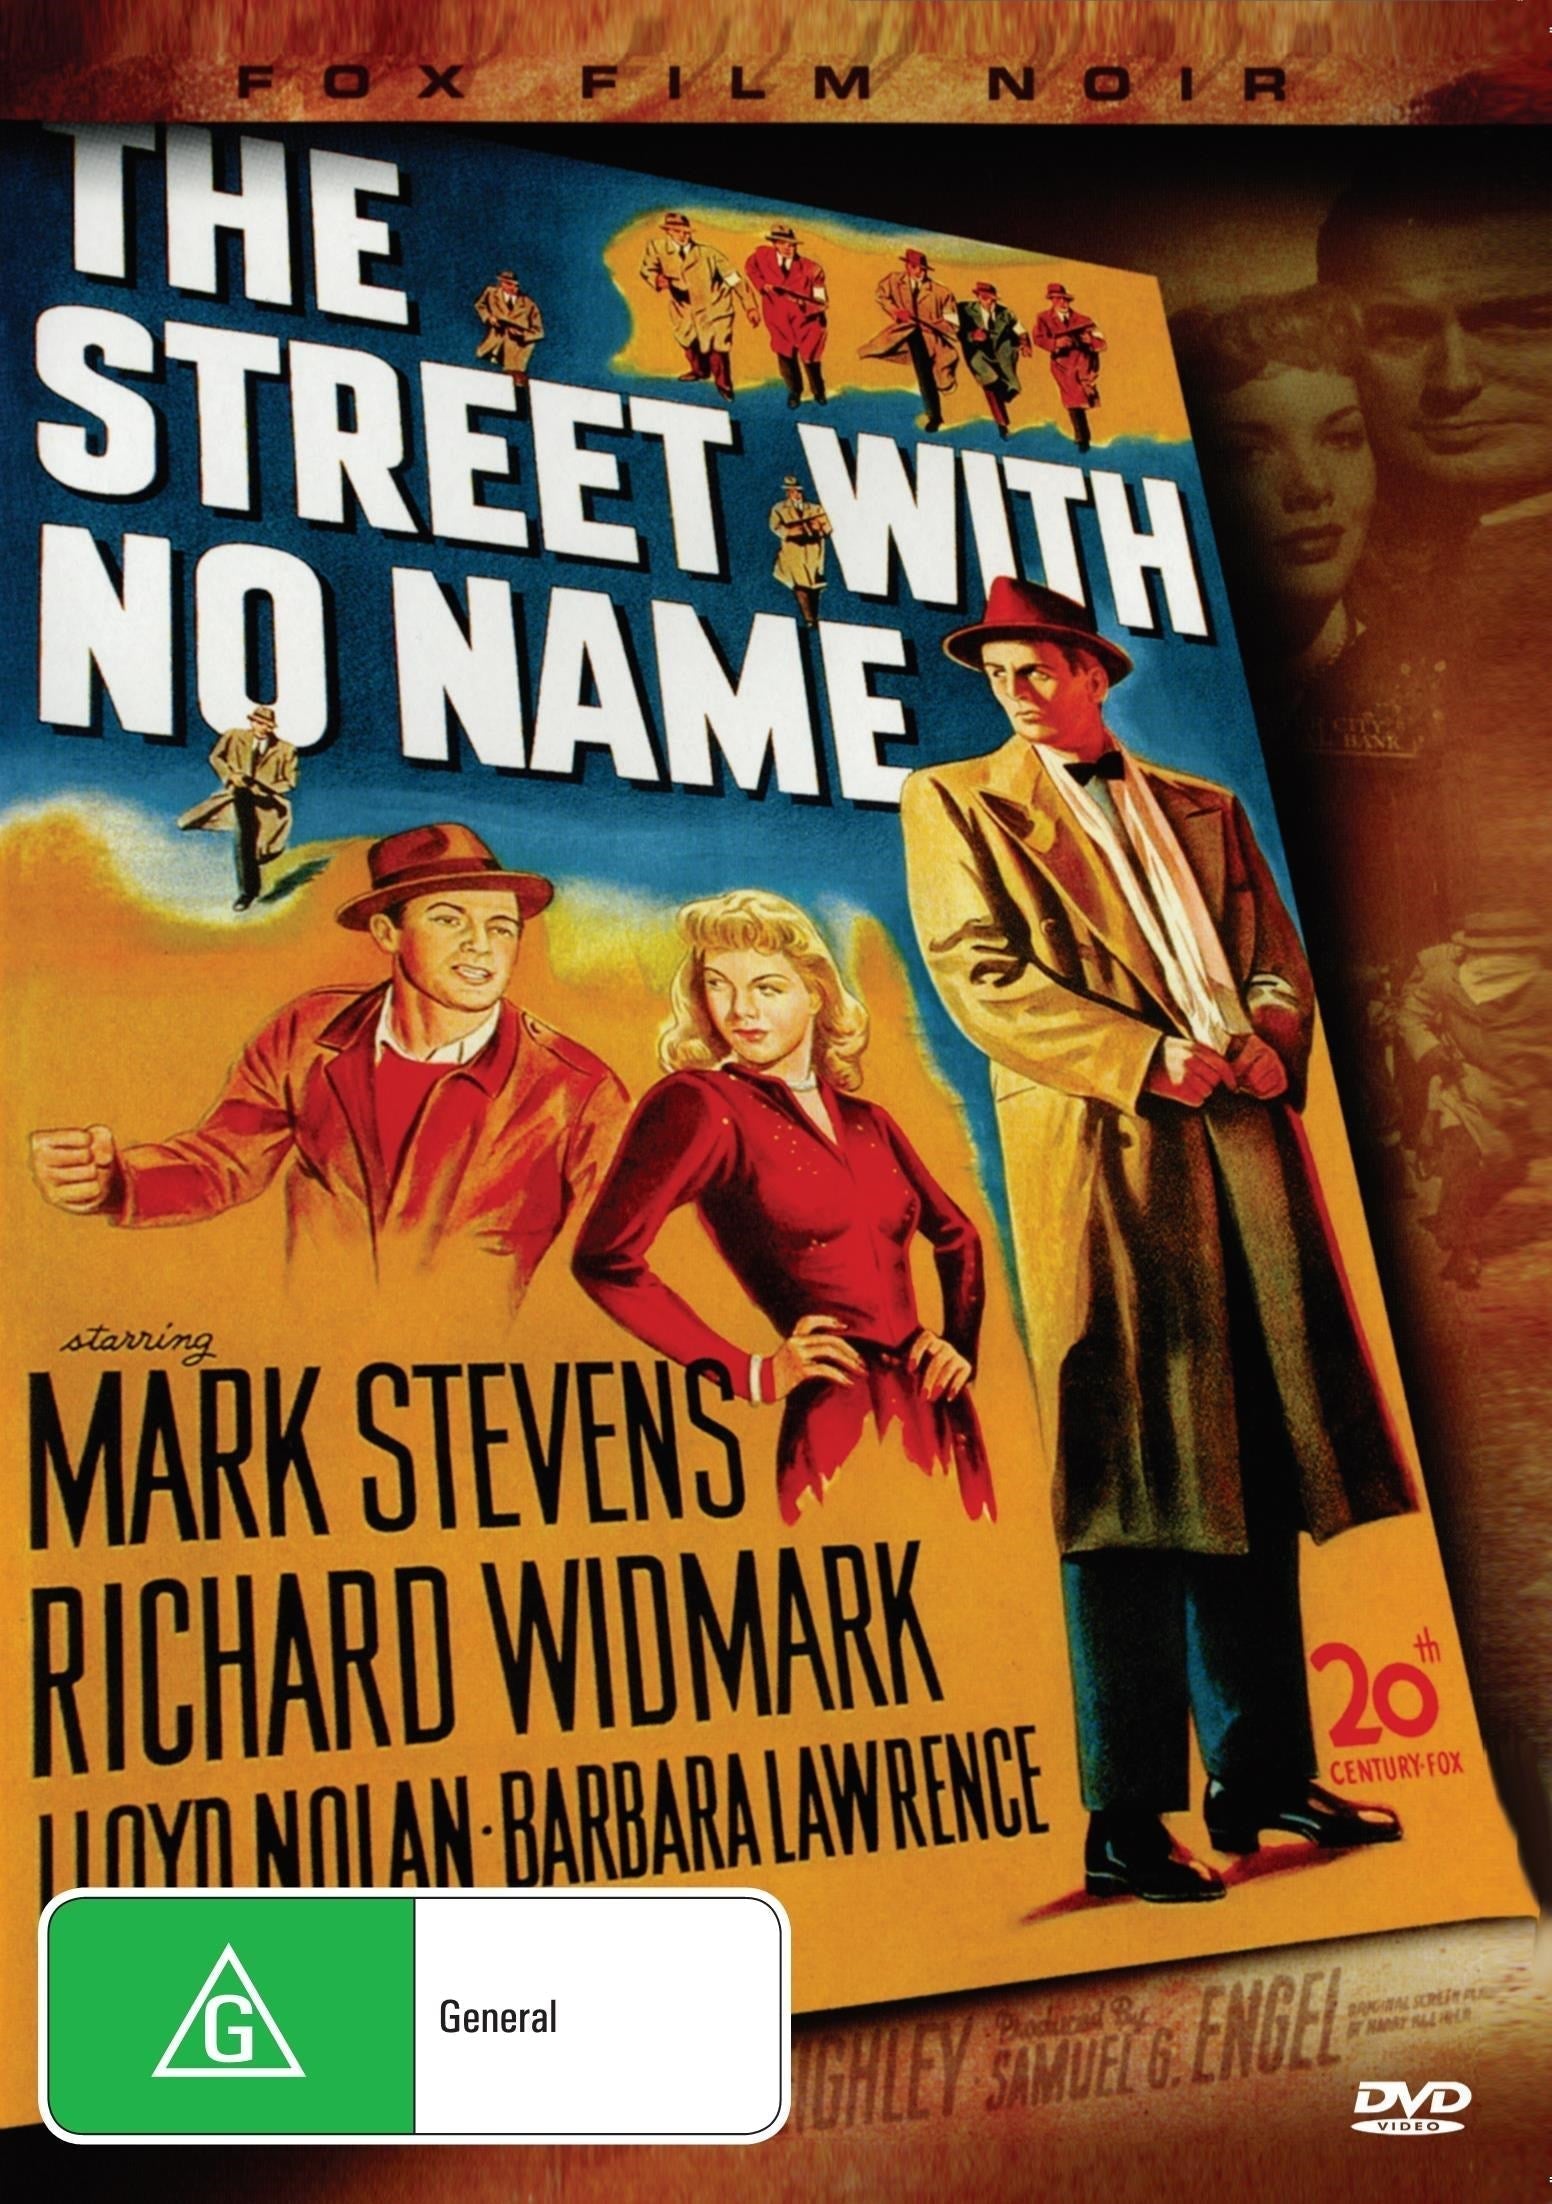 The Street With No Name rareandcollectibledvds